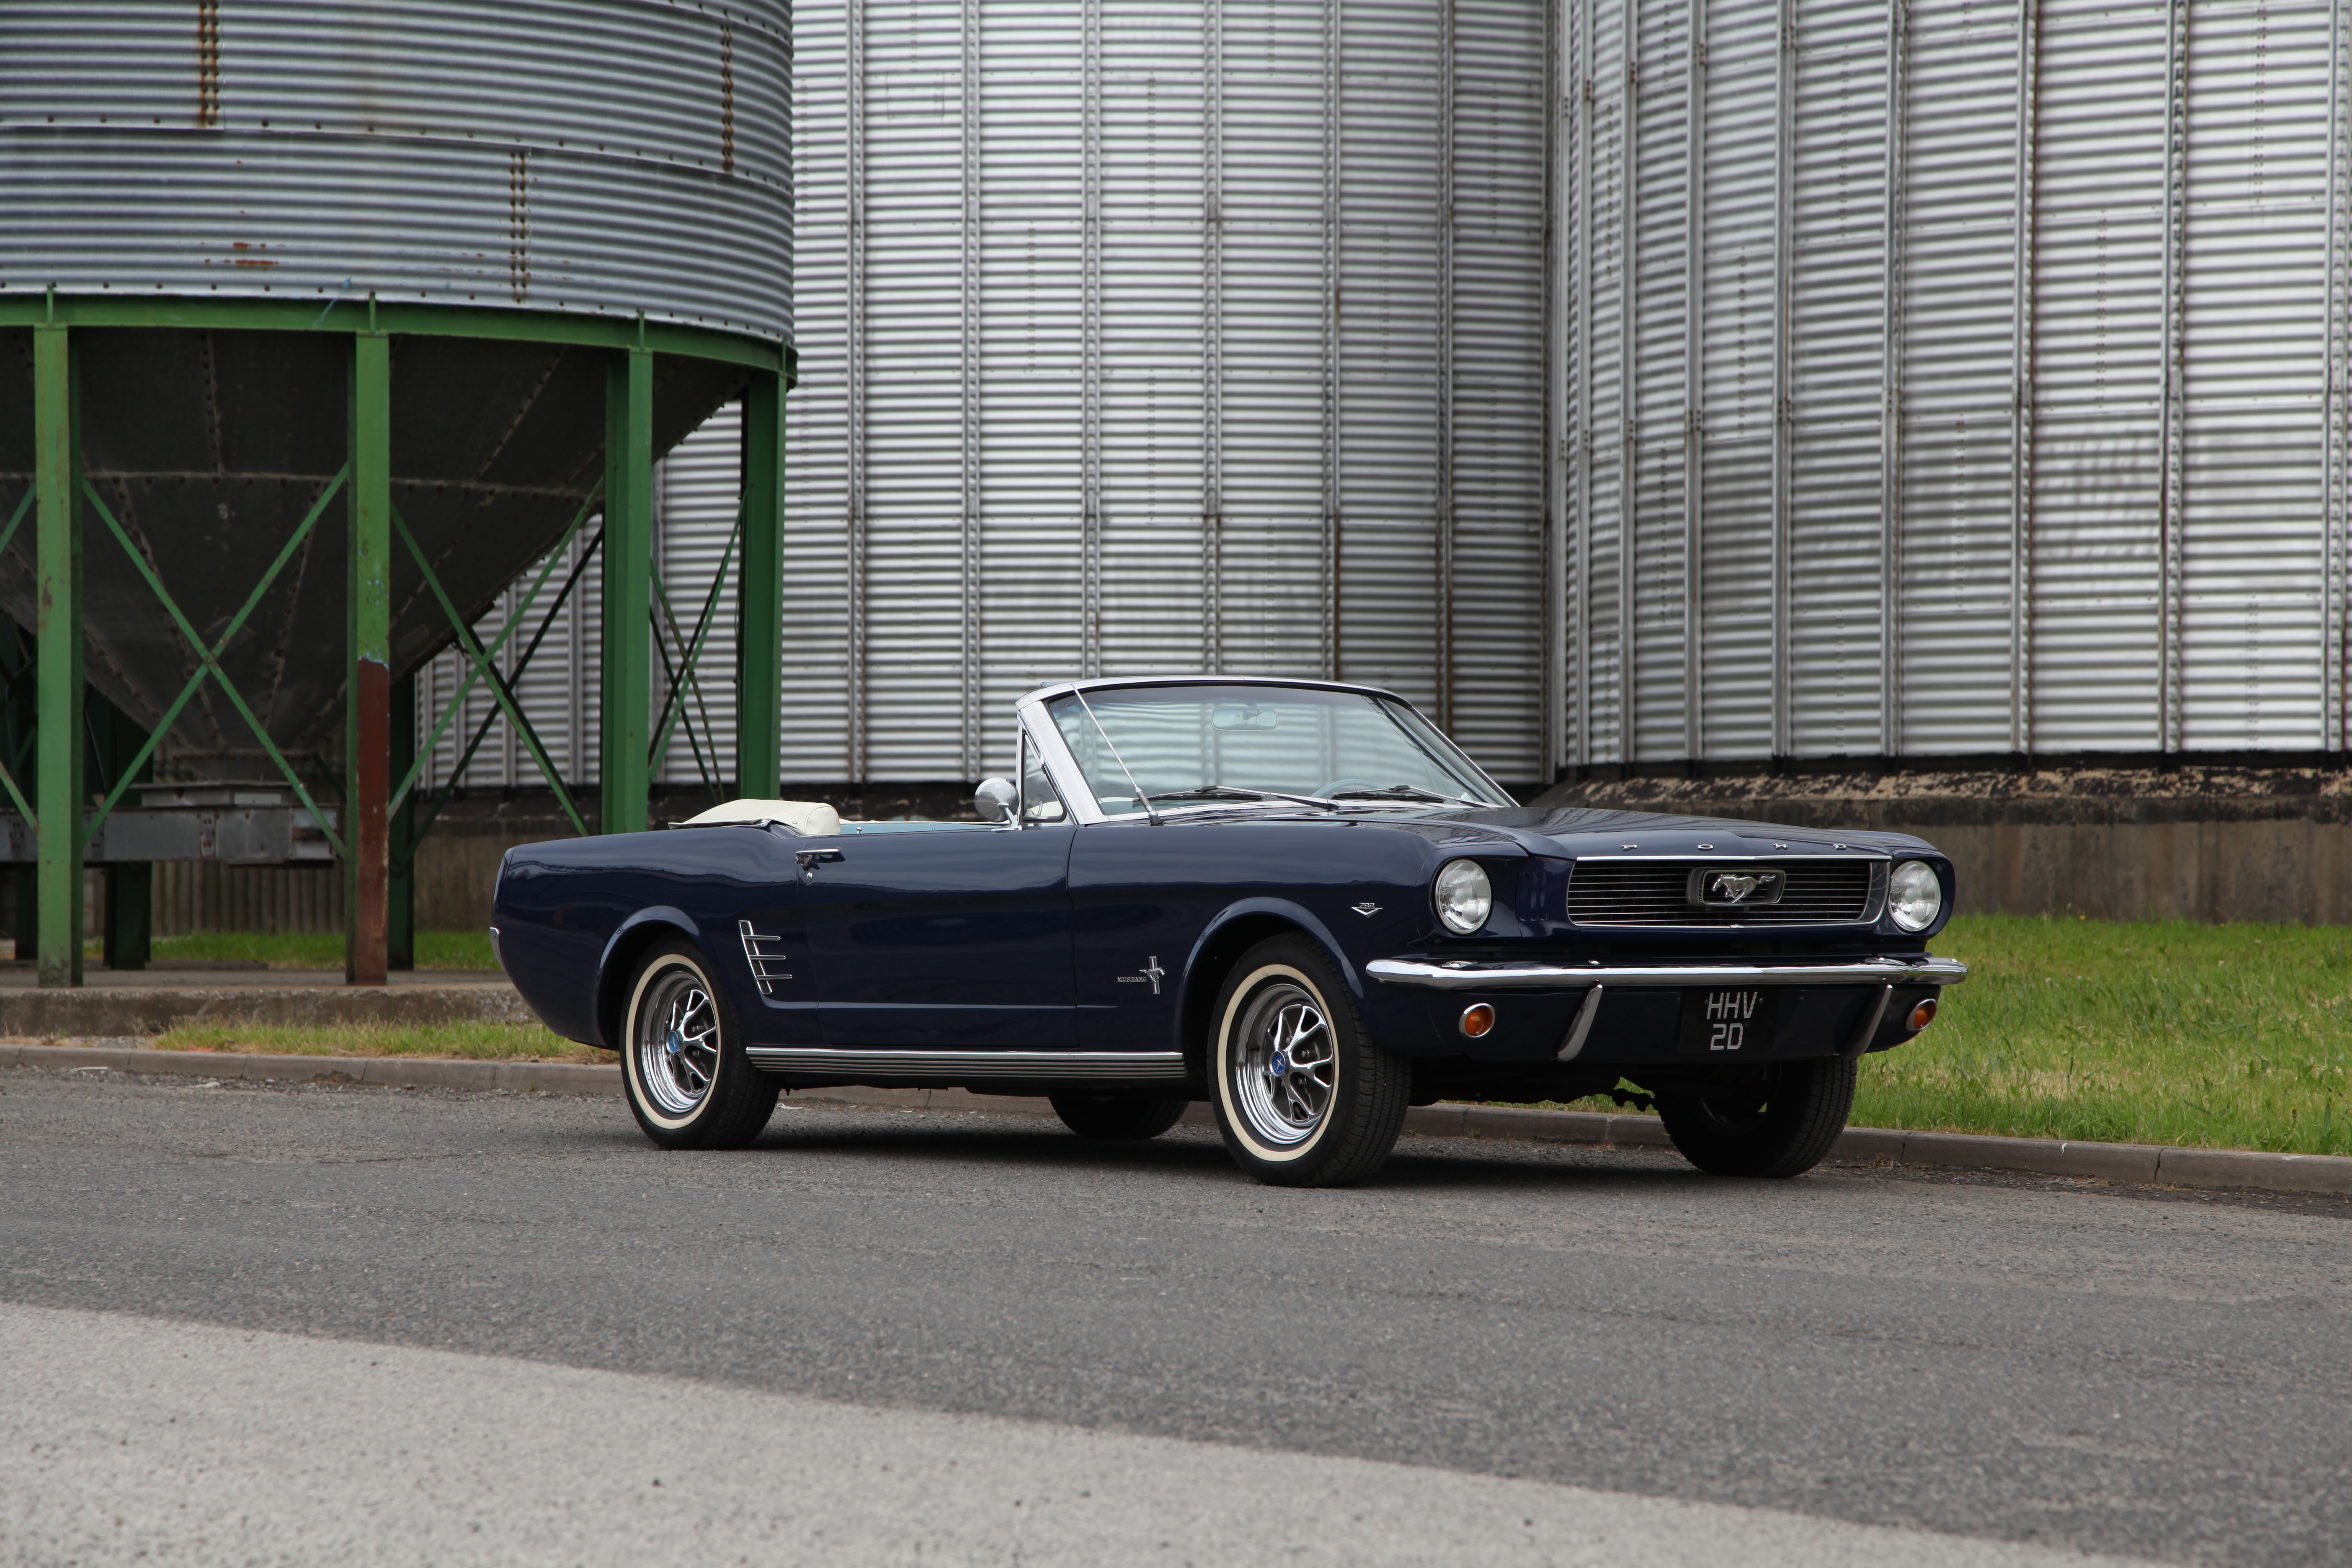 1966 blue Ford Mustang Convertible